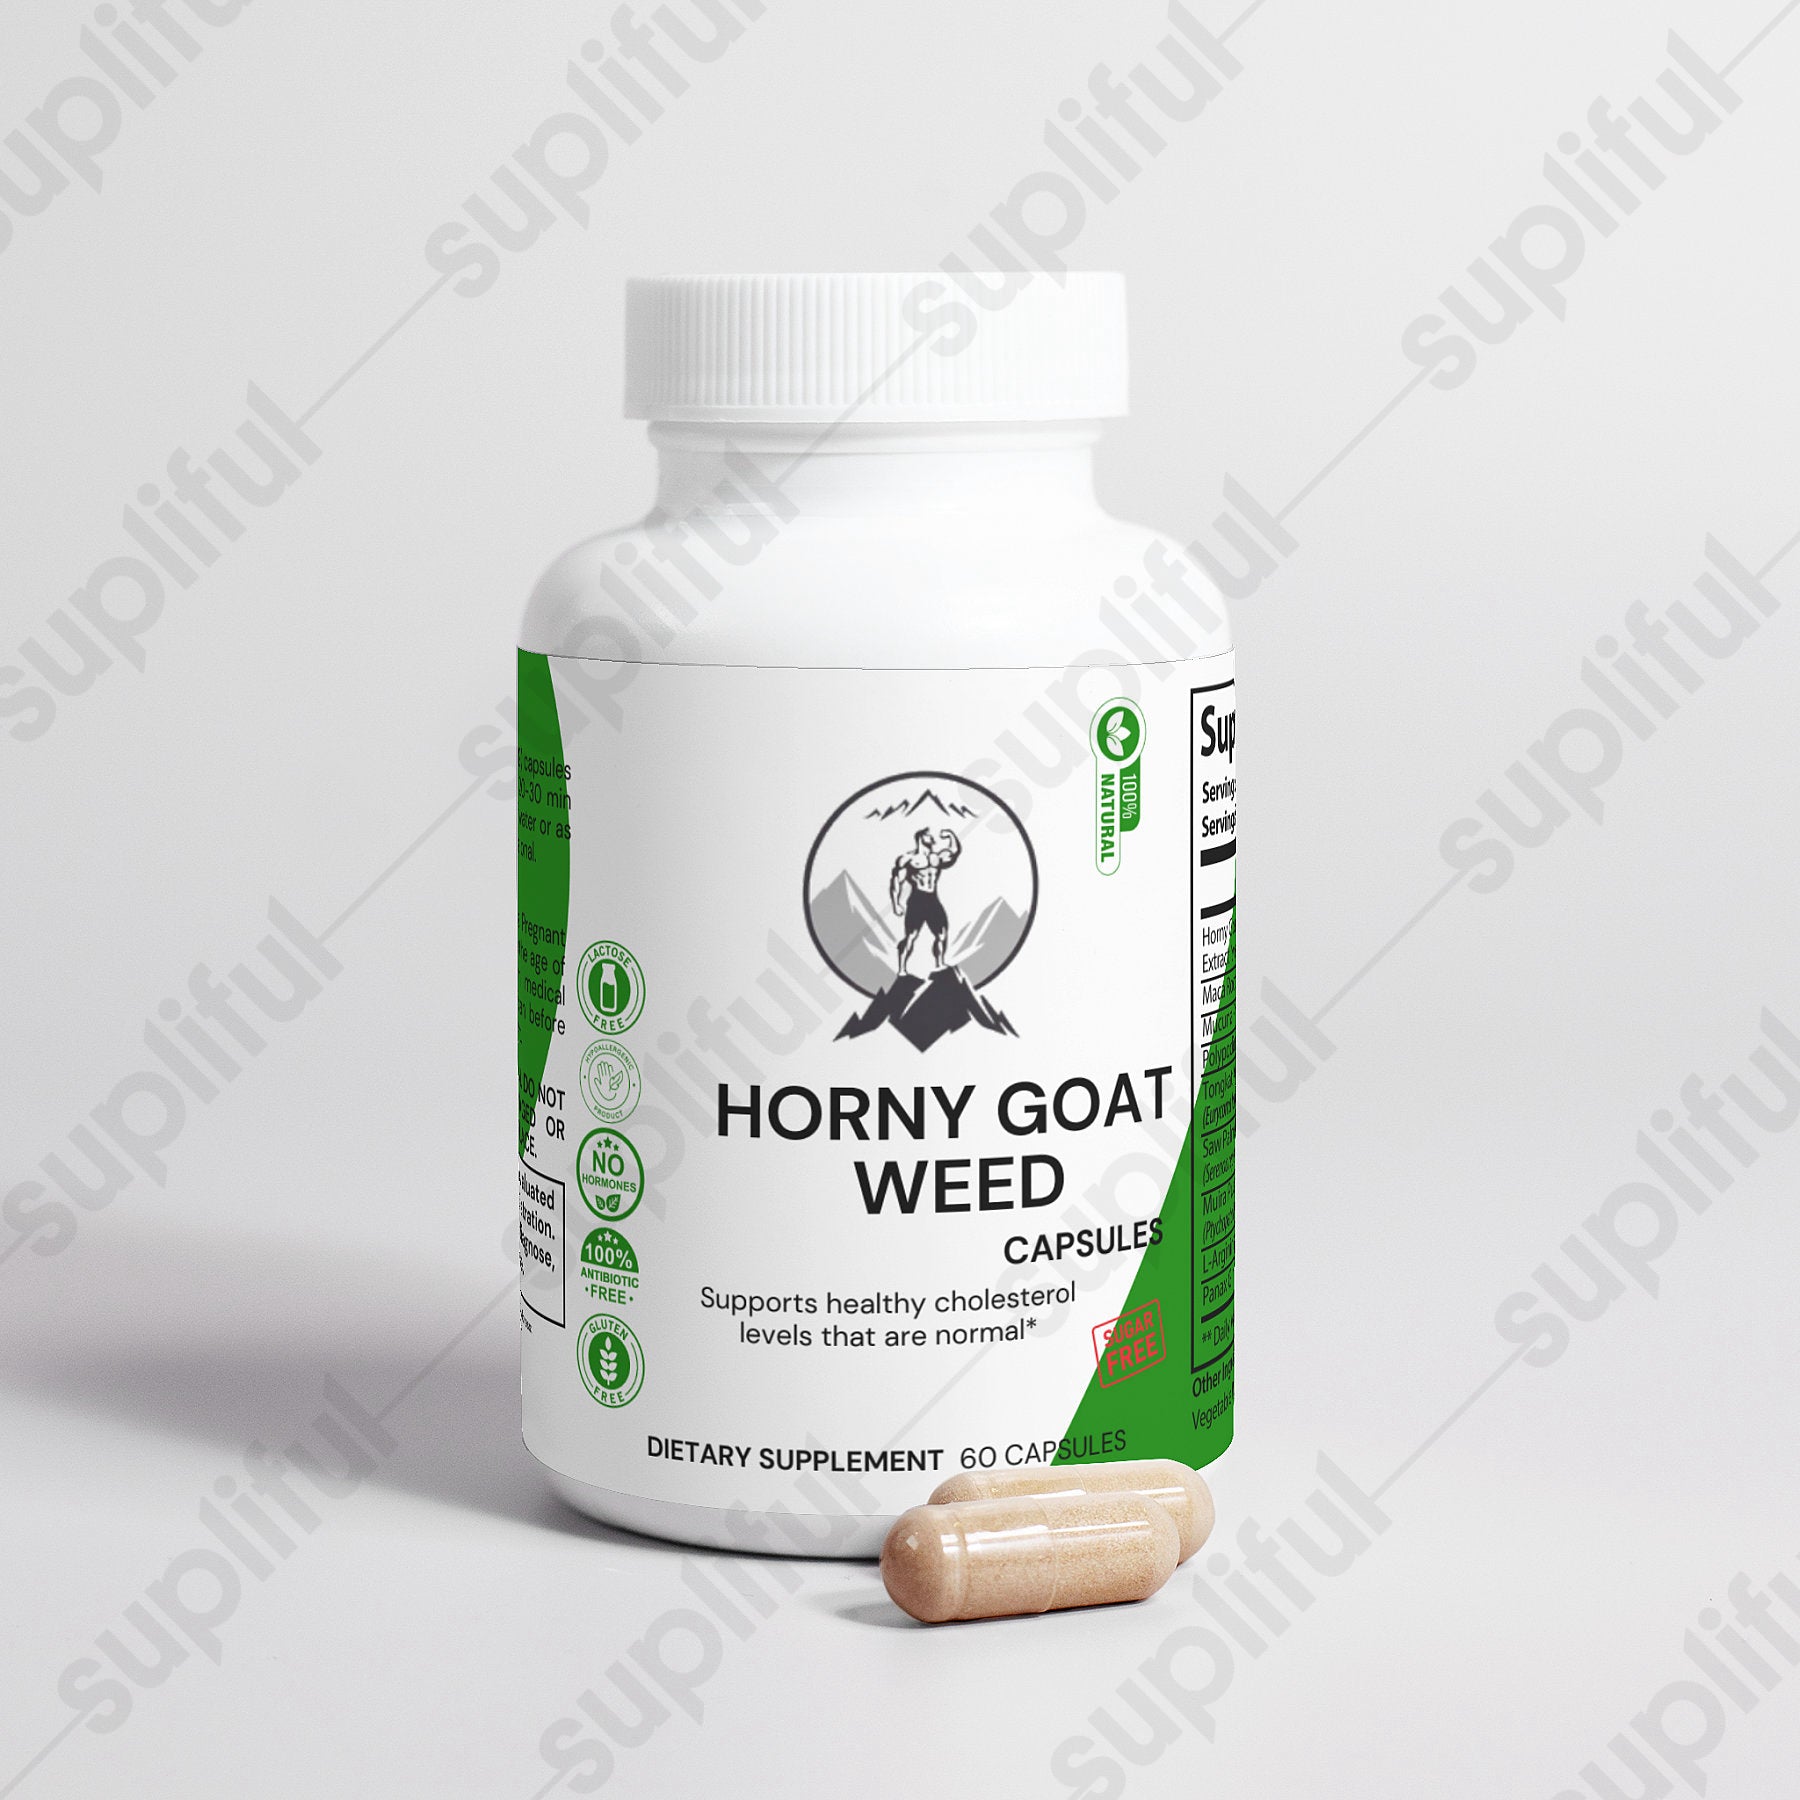 Horny Goat Weed BlendNatural ExtractsTraditional Chinese medicine practitioners have used the horny goat weed plant to help improve sexual health and stamina for centuries. However, Horney Goat Weed BleHorny Goat Weed BlendThe Rocky Ranger